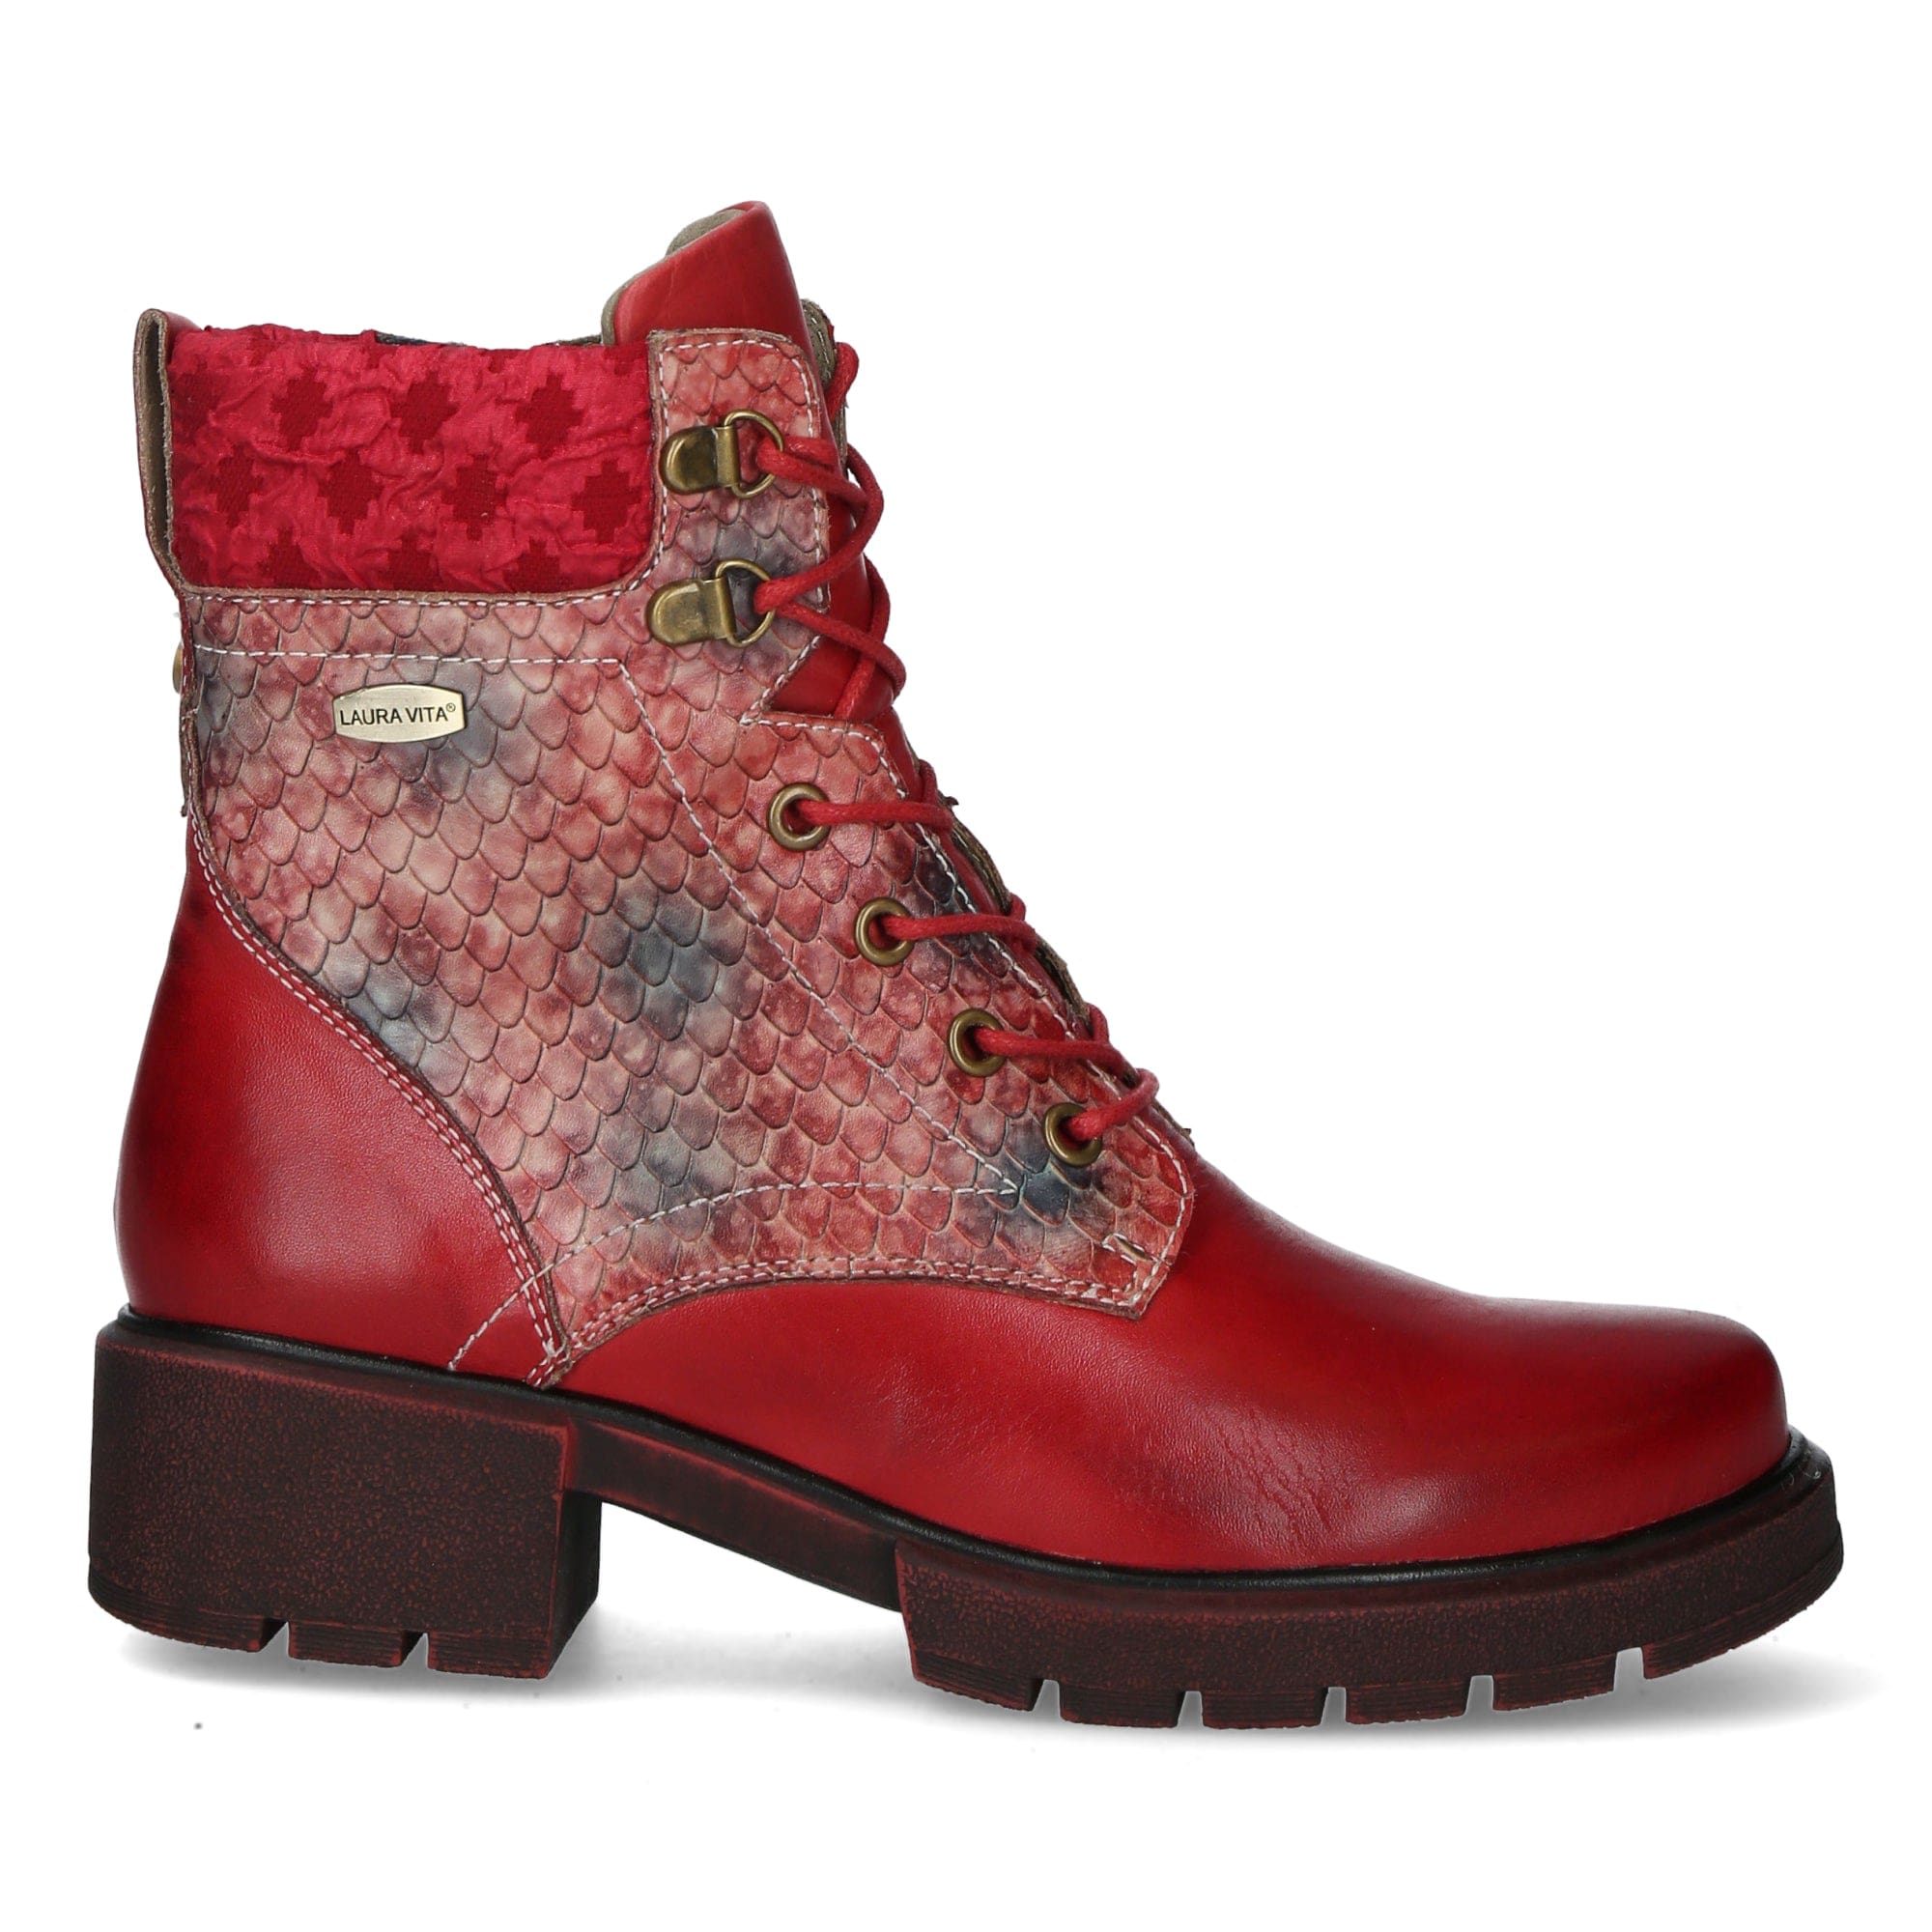 Chaussure IDCEAO 16 - 35 / Rouge - Boots